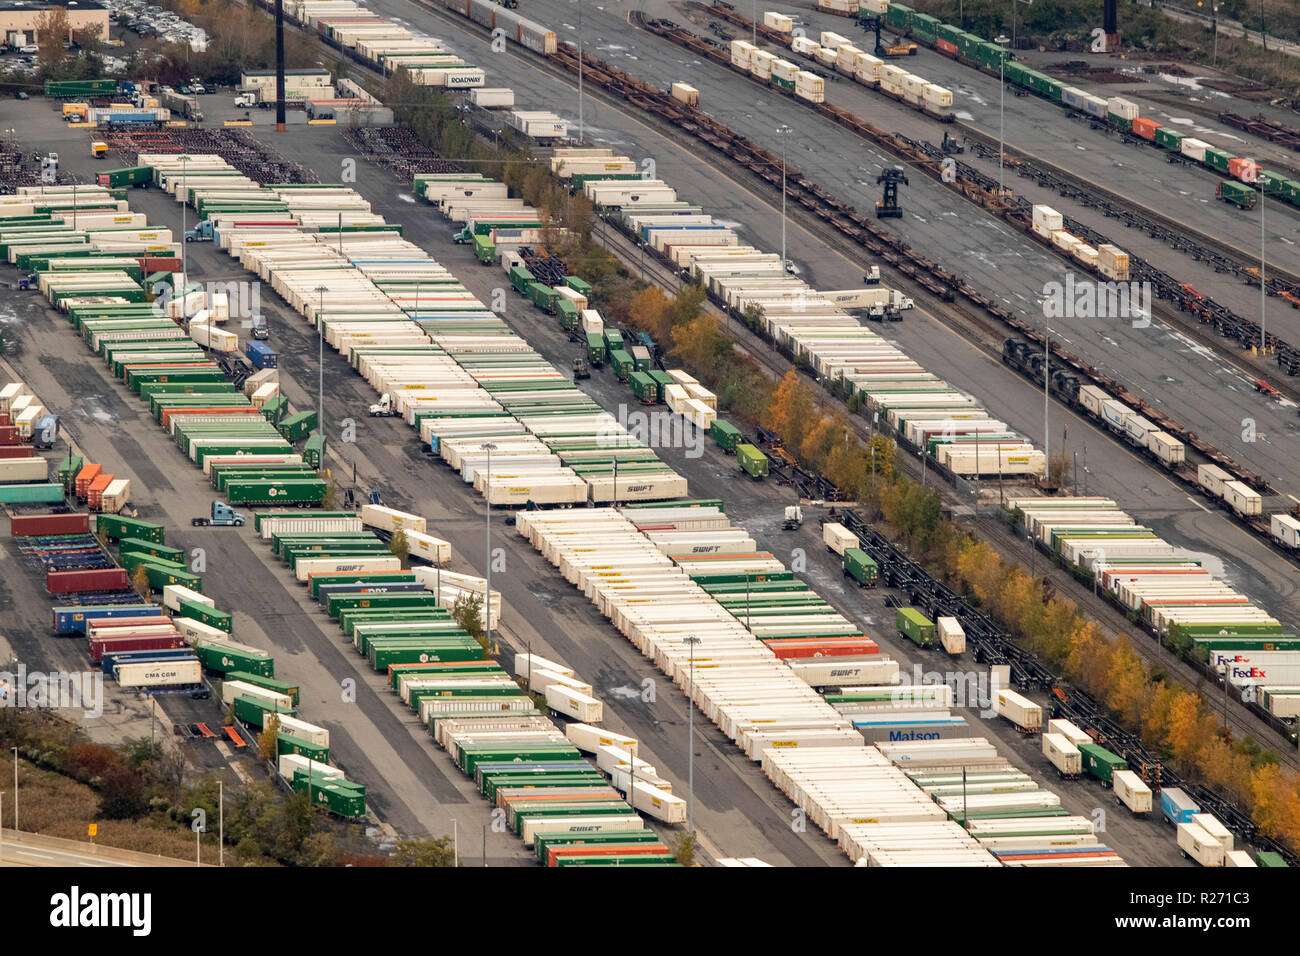 helicopter aerial view of containers and railway cars, Kearney, New Jersey, USA Stock Photo